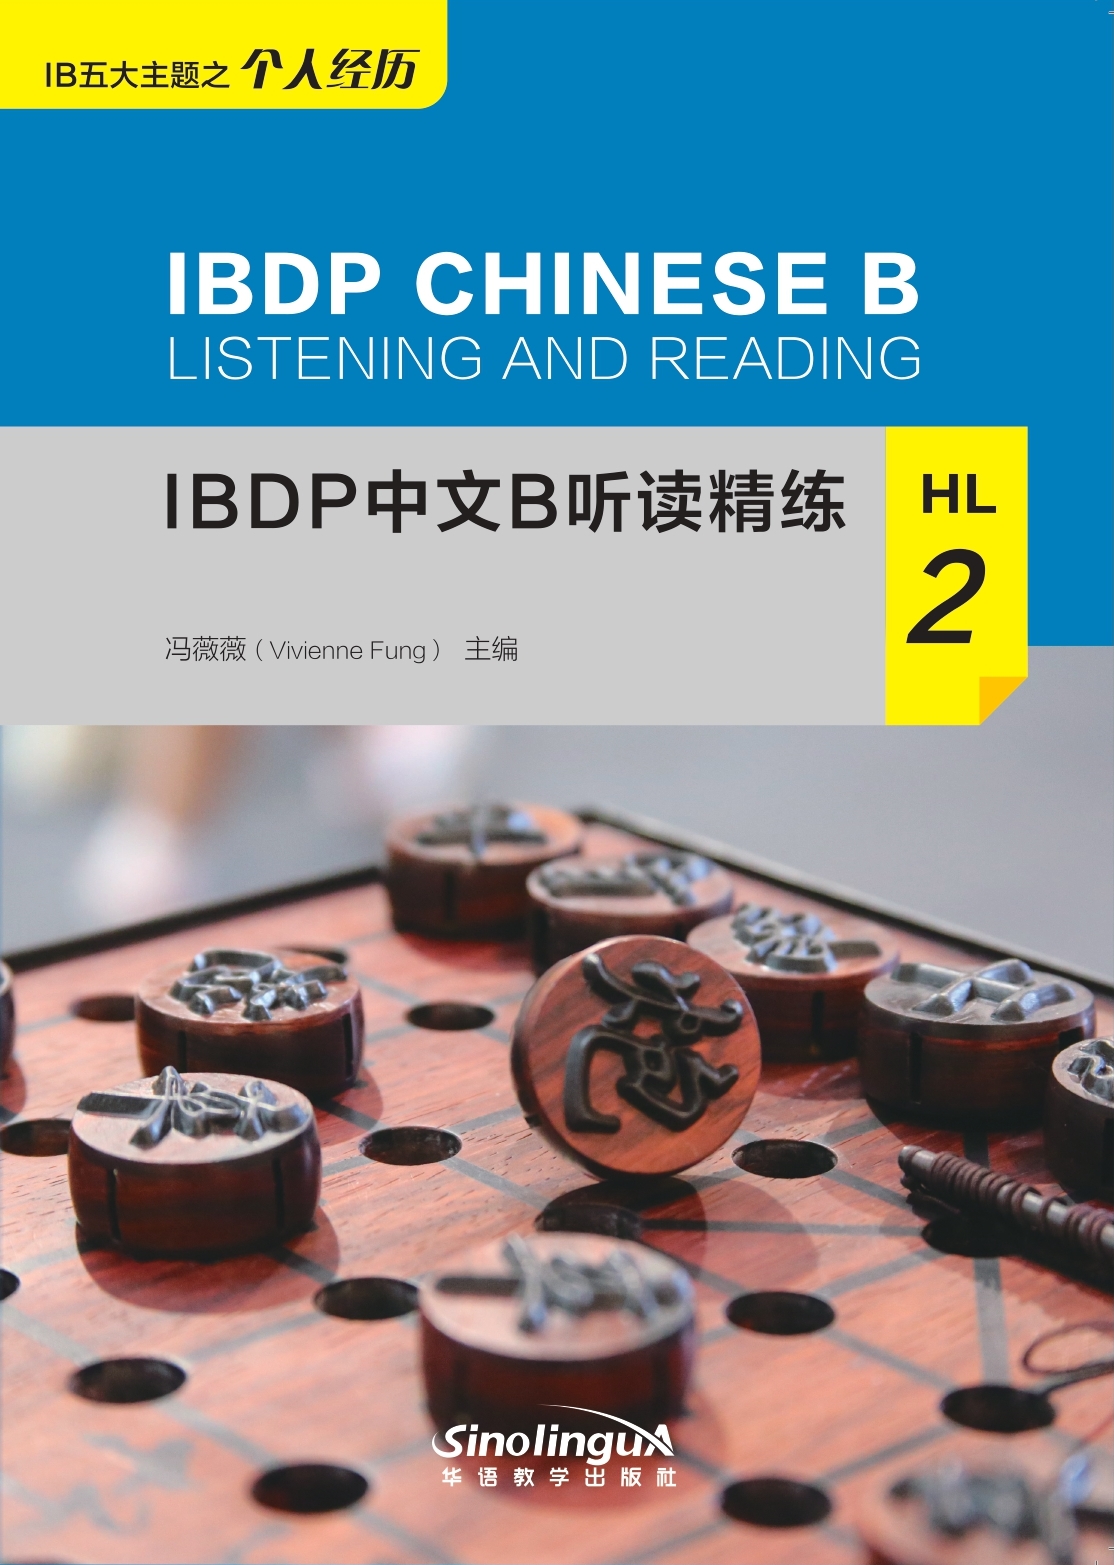 IBDP Chinese B Listening and Reading ·HL·2